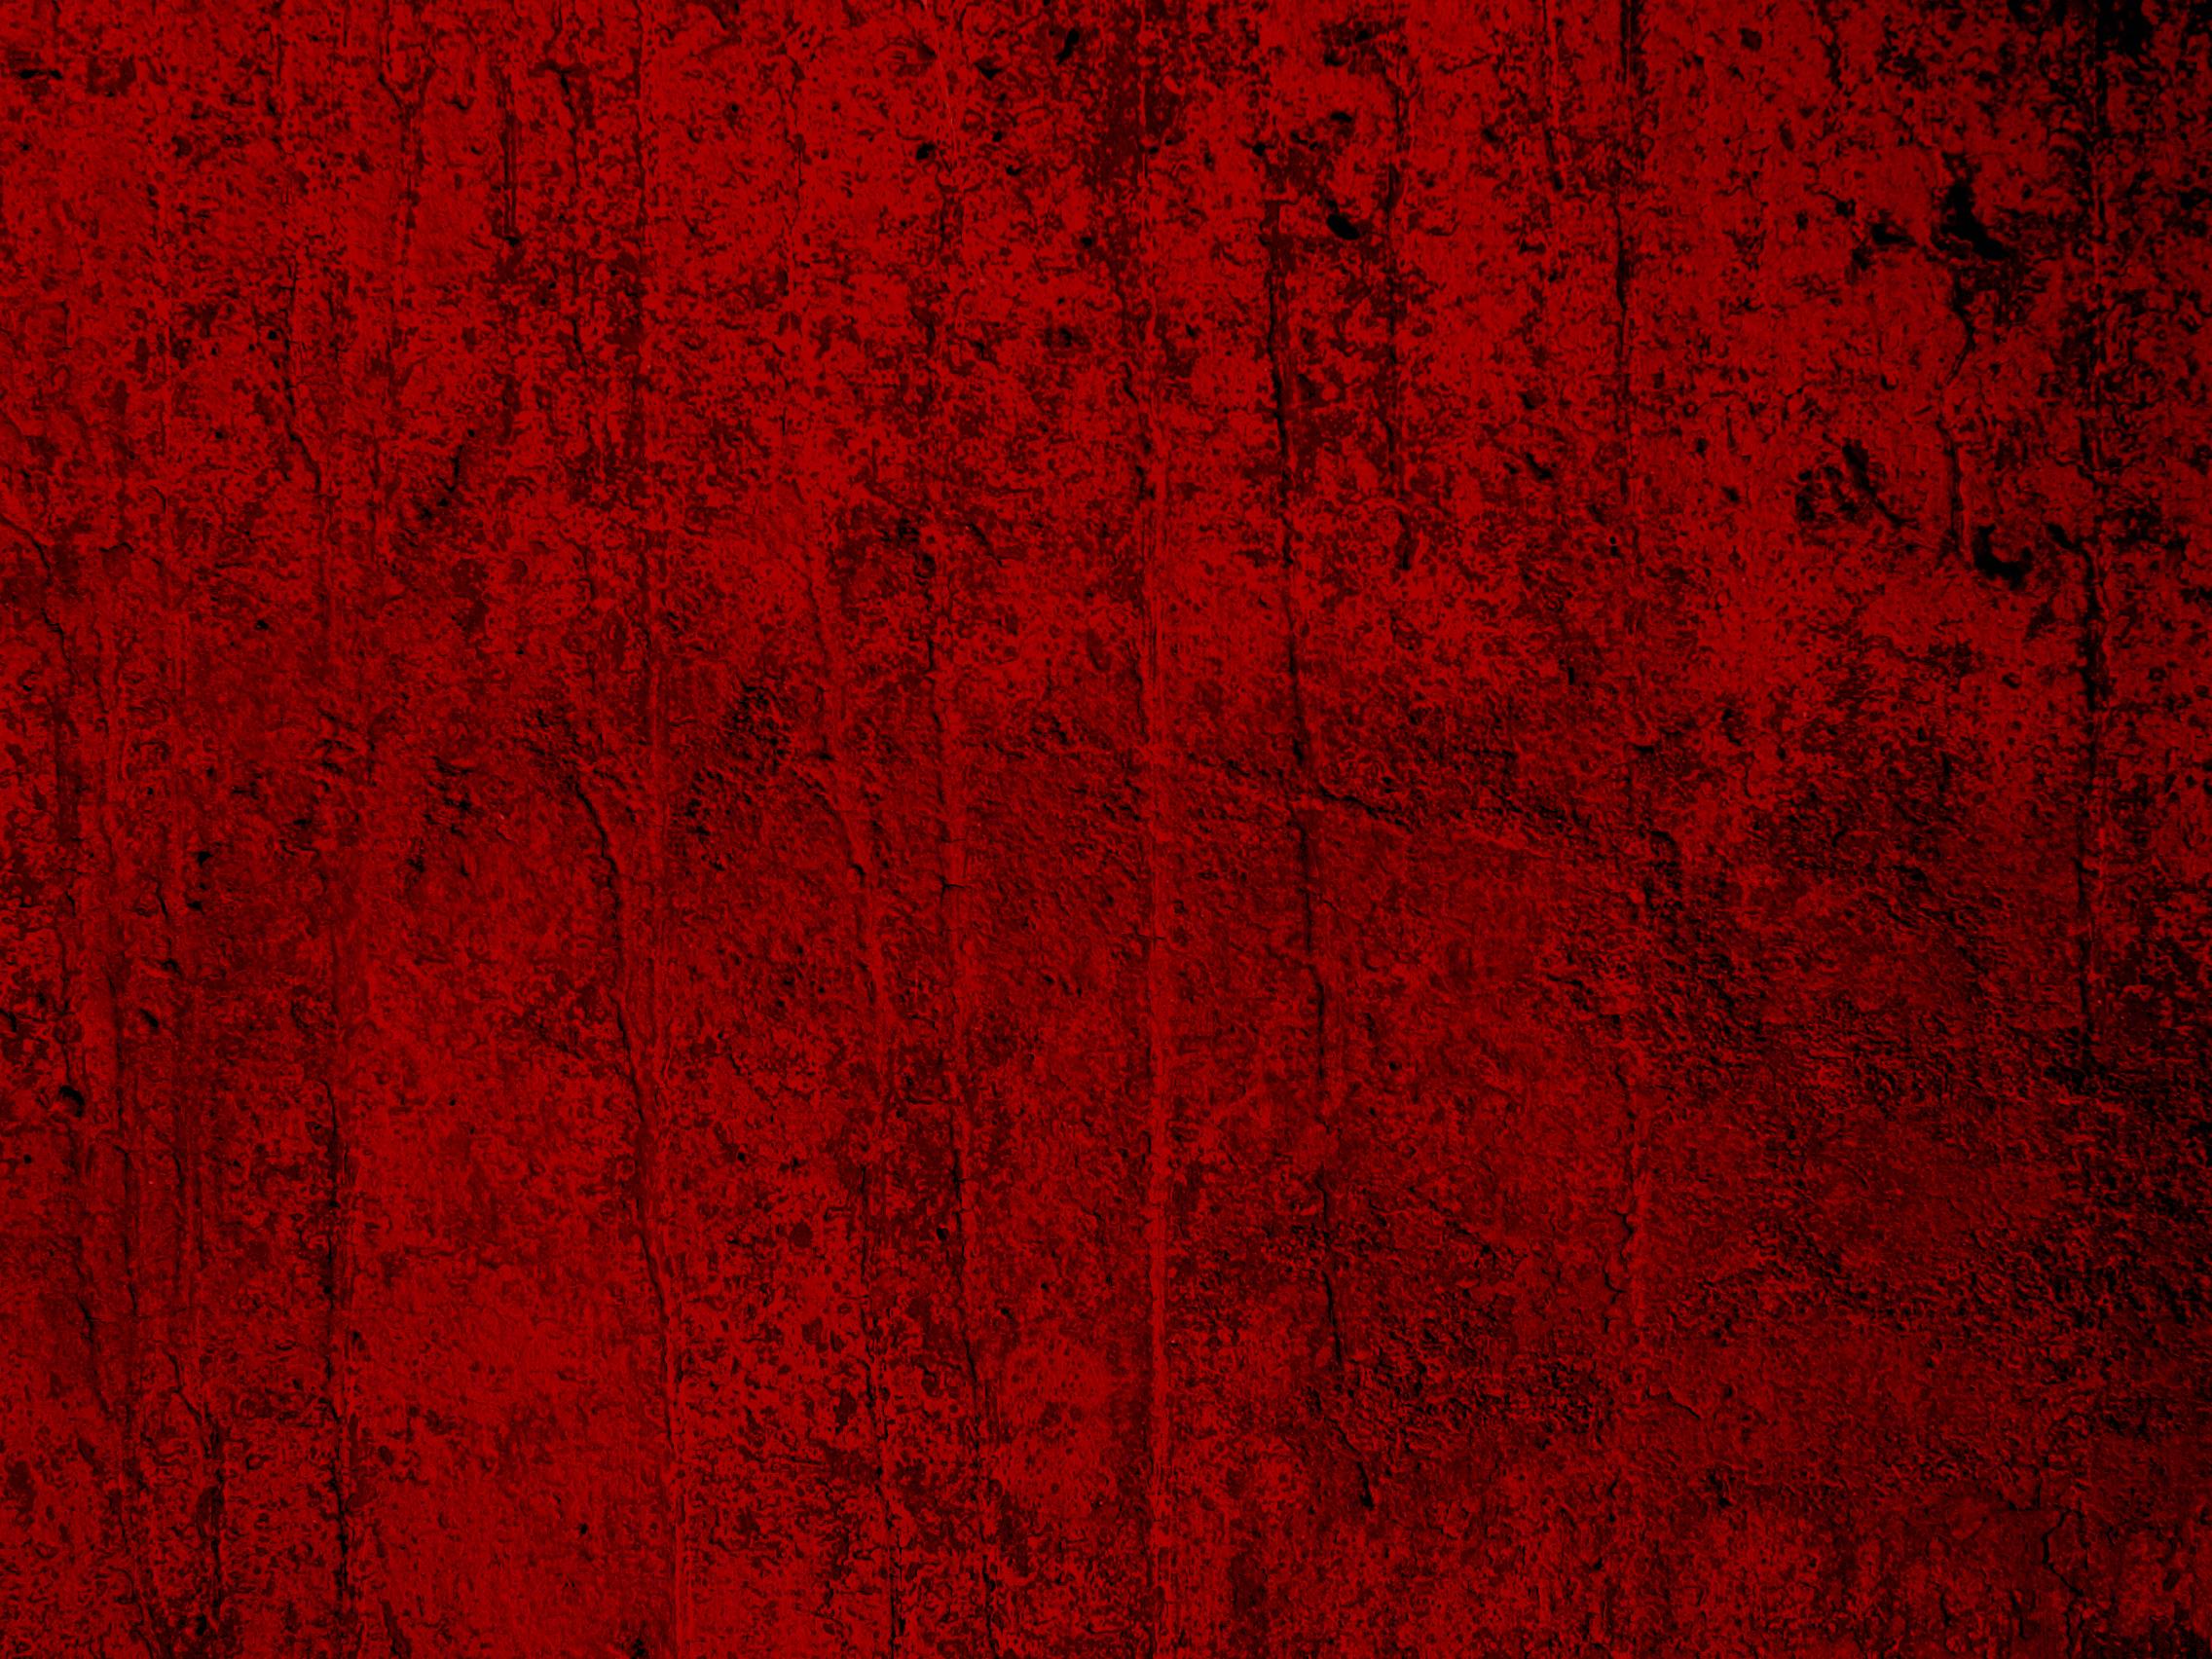 Dark red backgrounds